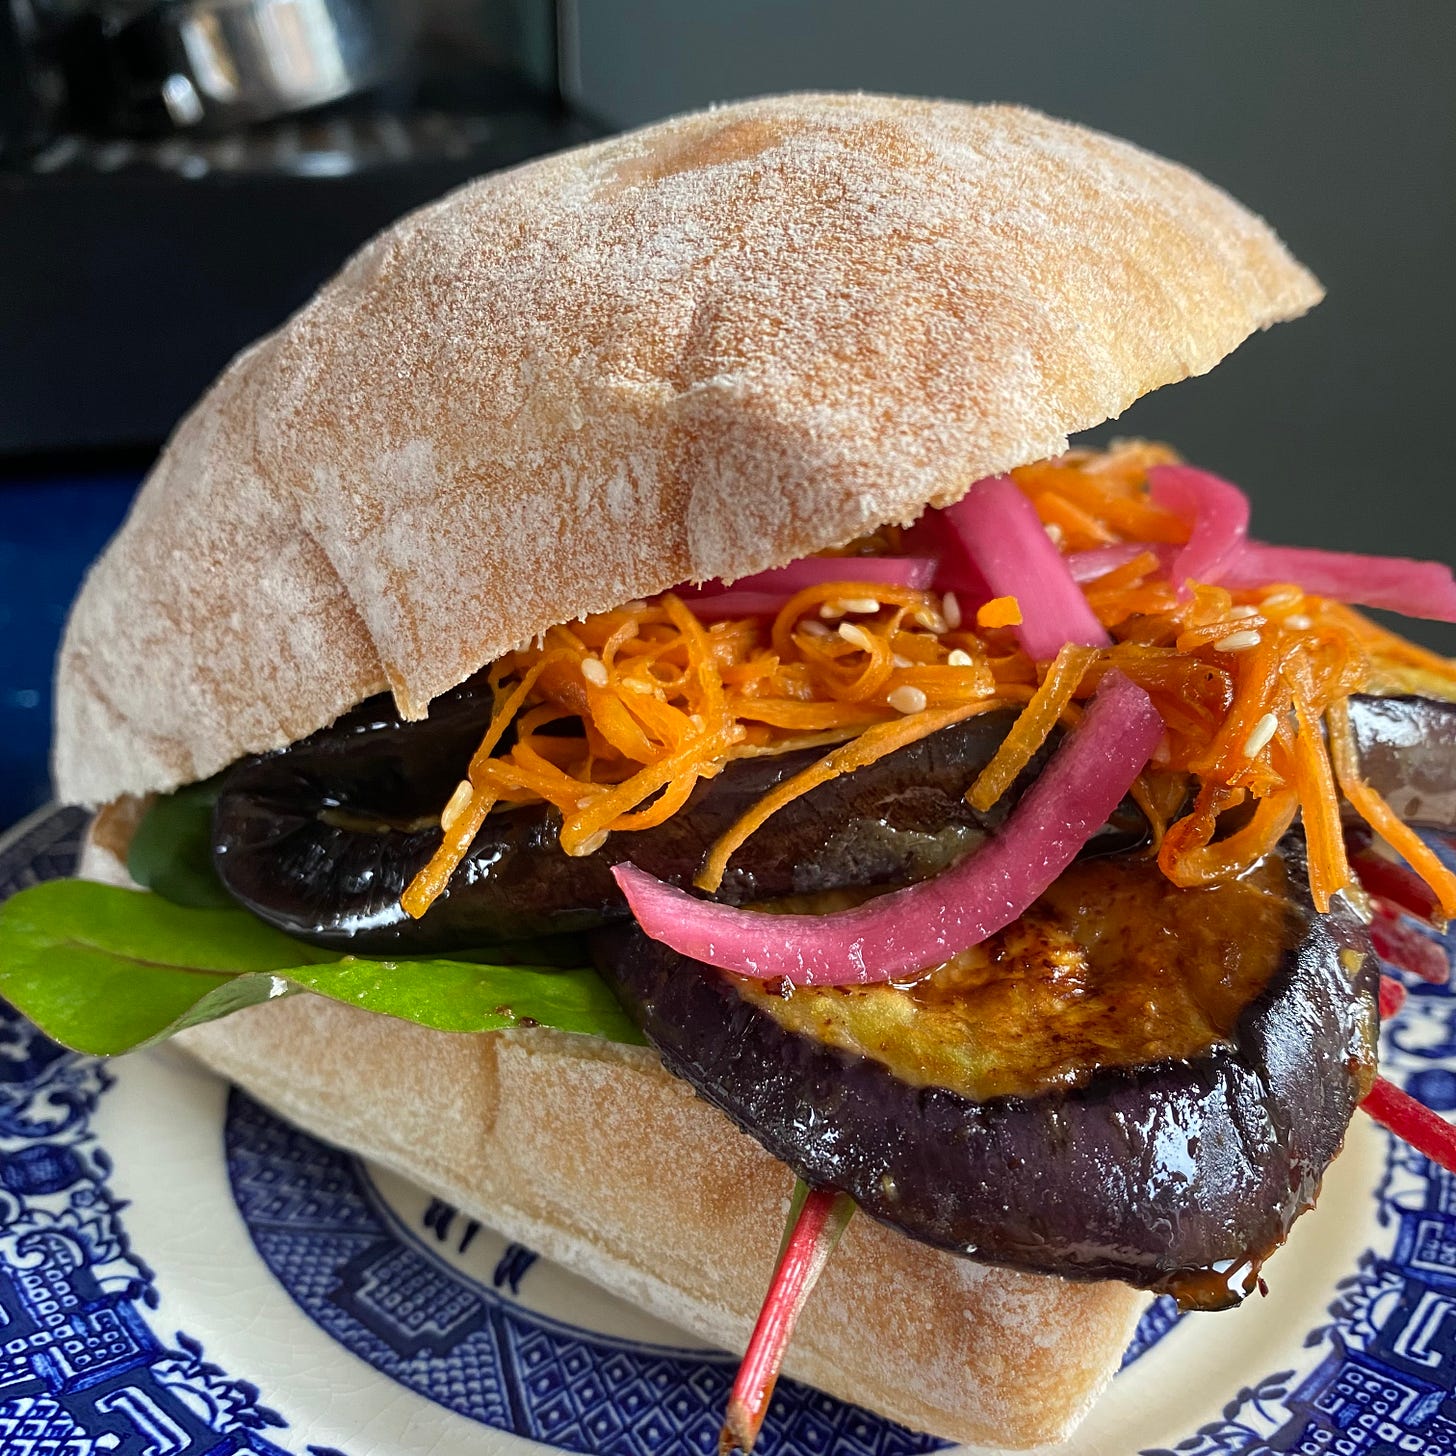 Ciabatta roll filled with sliced aubergine, shredded carrot, pickled red onion and salad.